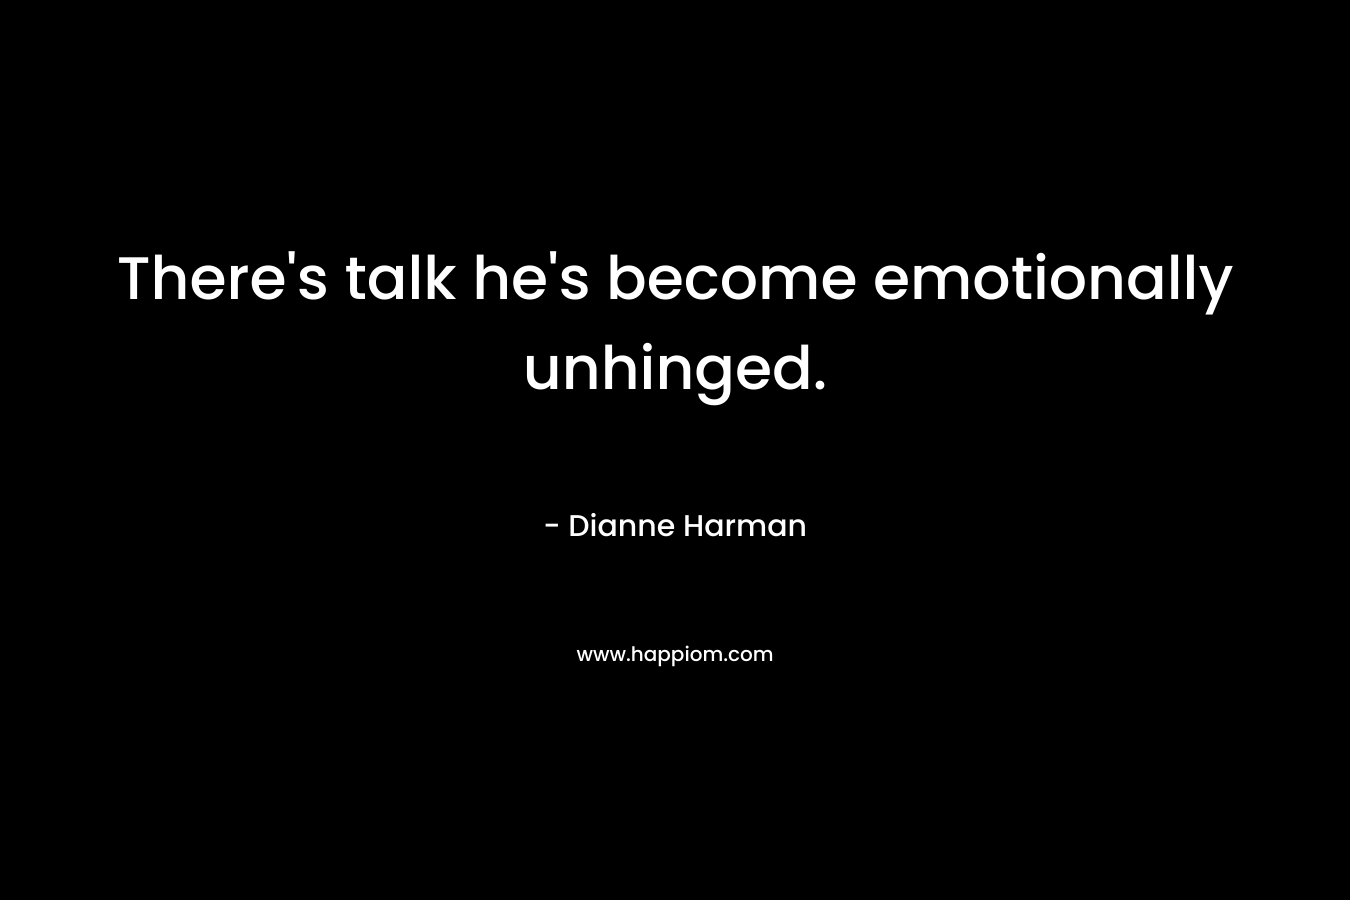 There’s talk he’s become emotionally unhinged. – Dianne Harman